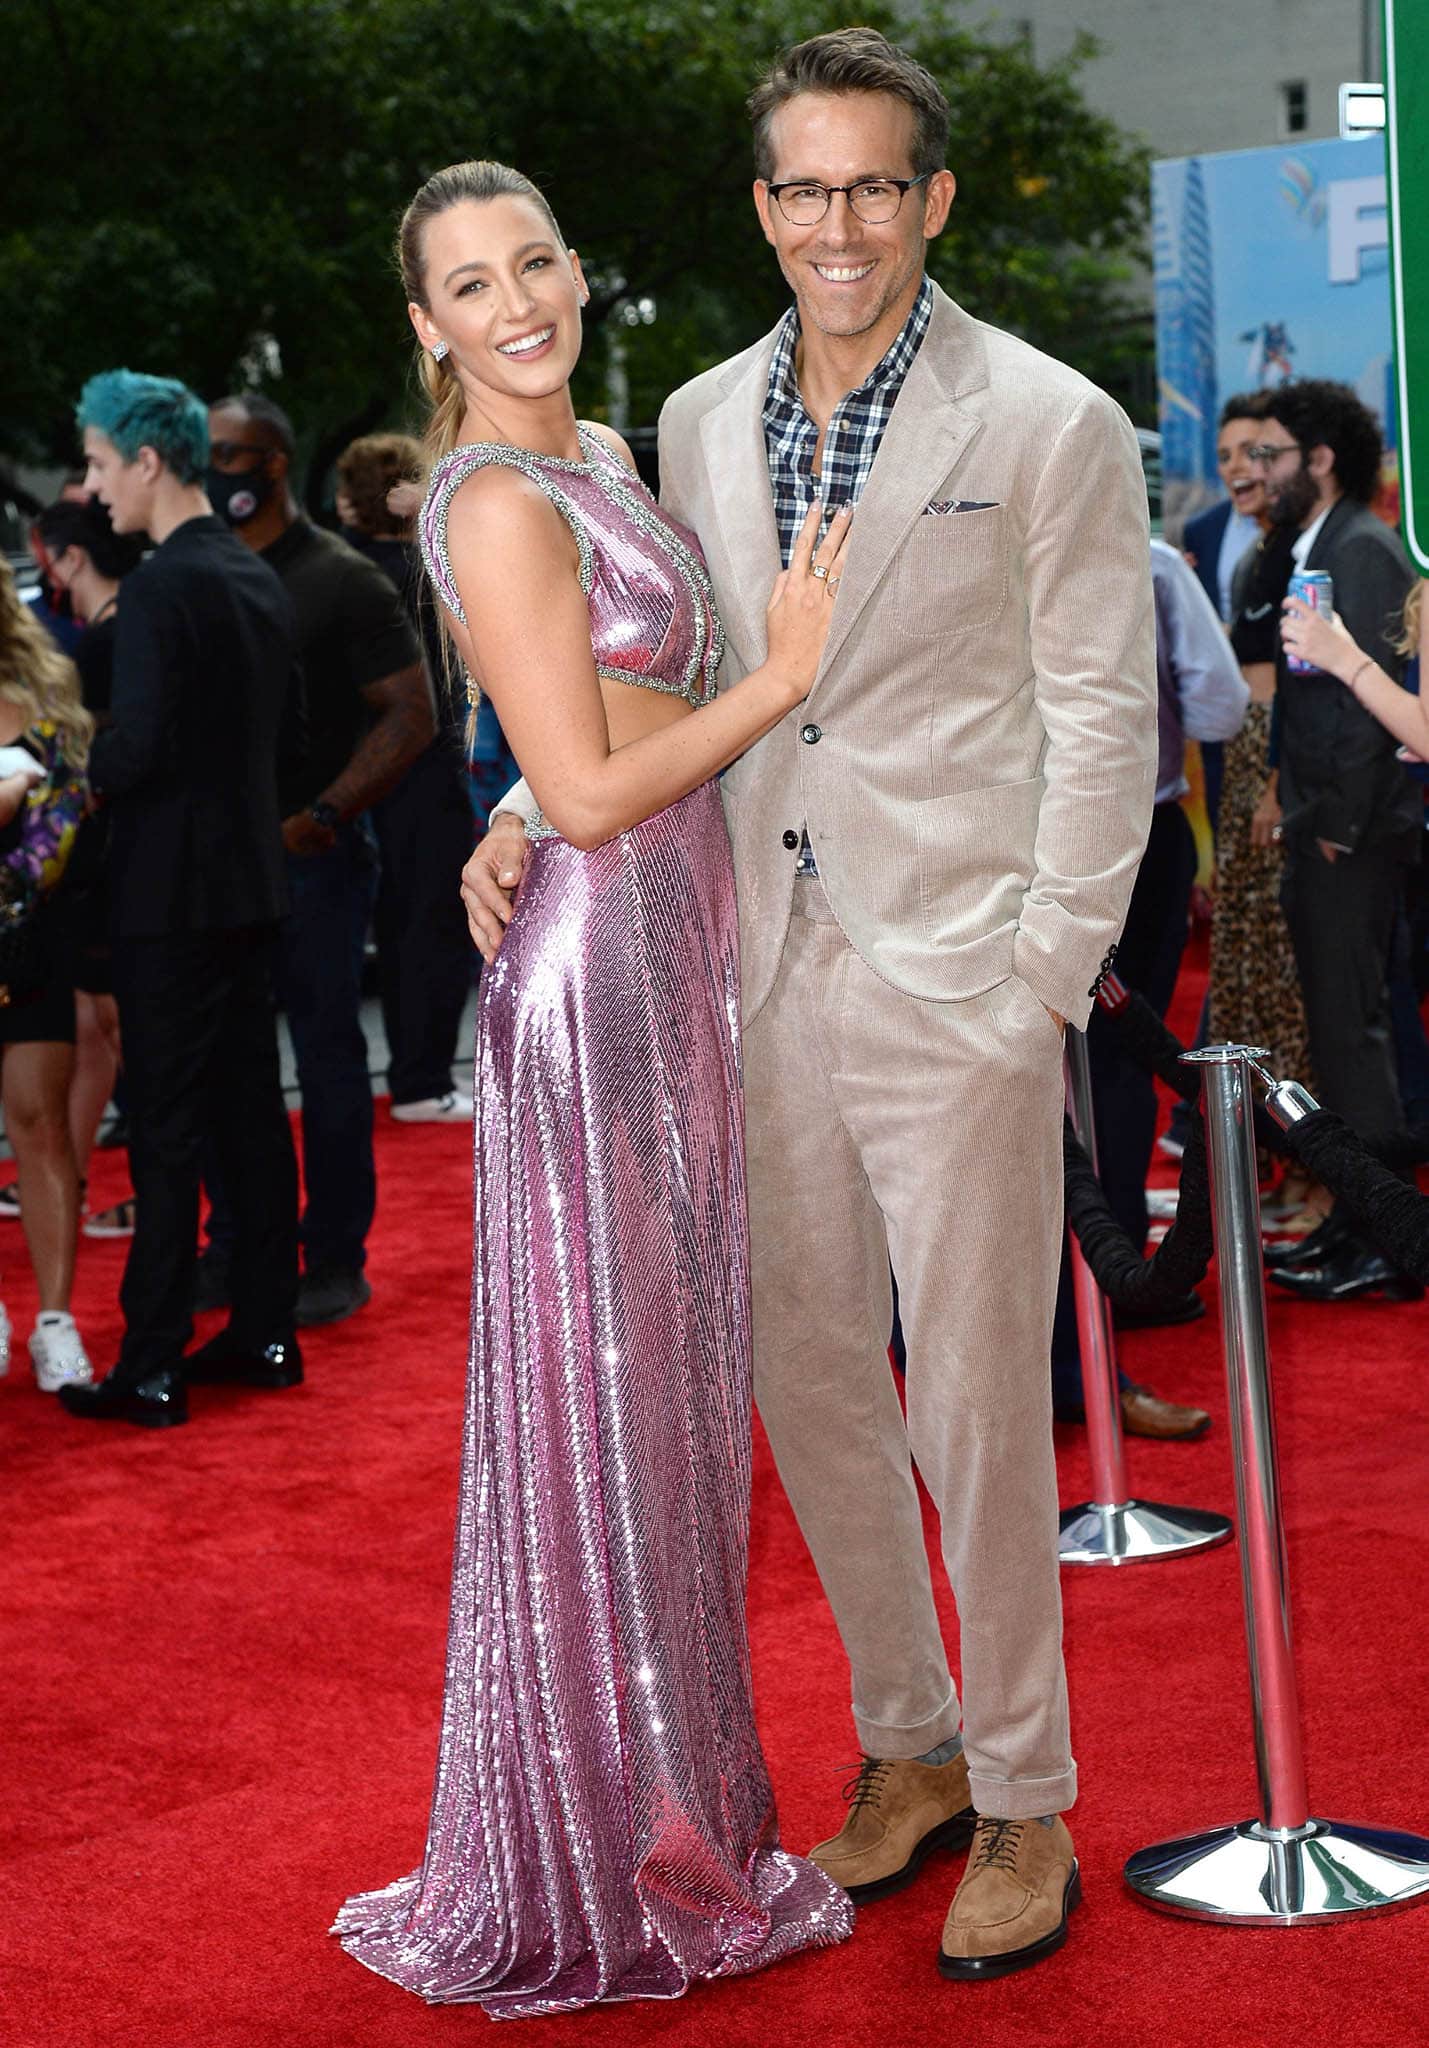 Blake Lively and Ryan Reynolds at the Free Guy premiere held at the AMC Lincoln Square Theater in New York City on August 3, 2021